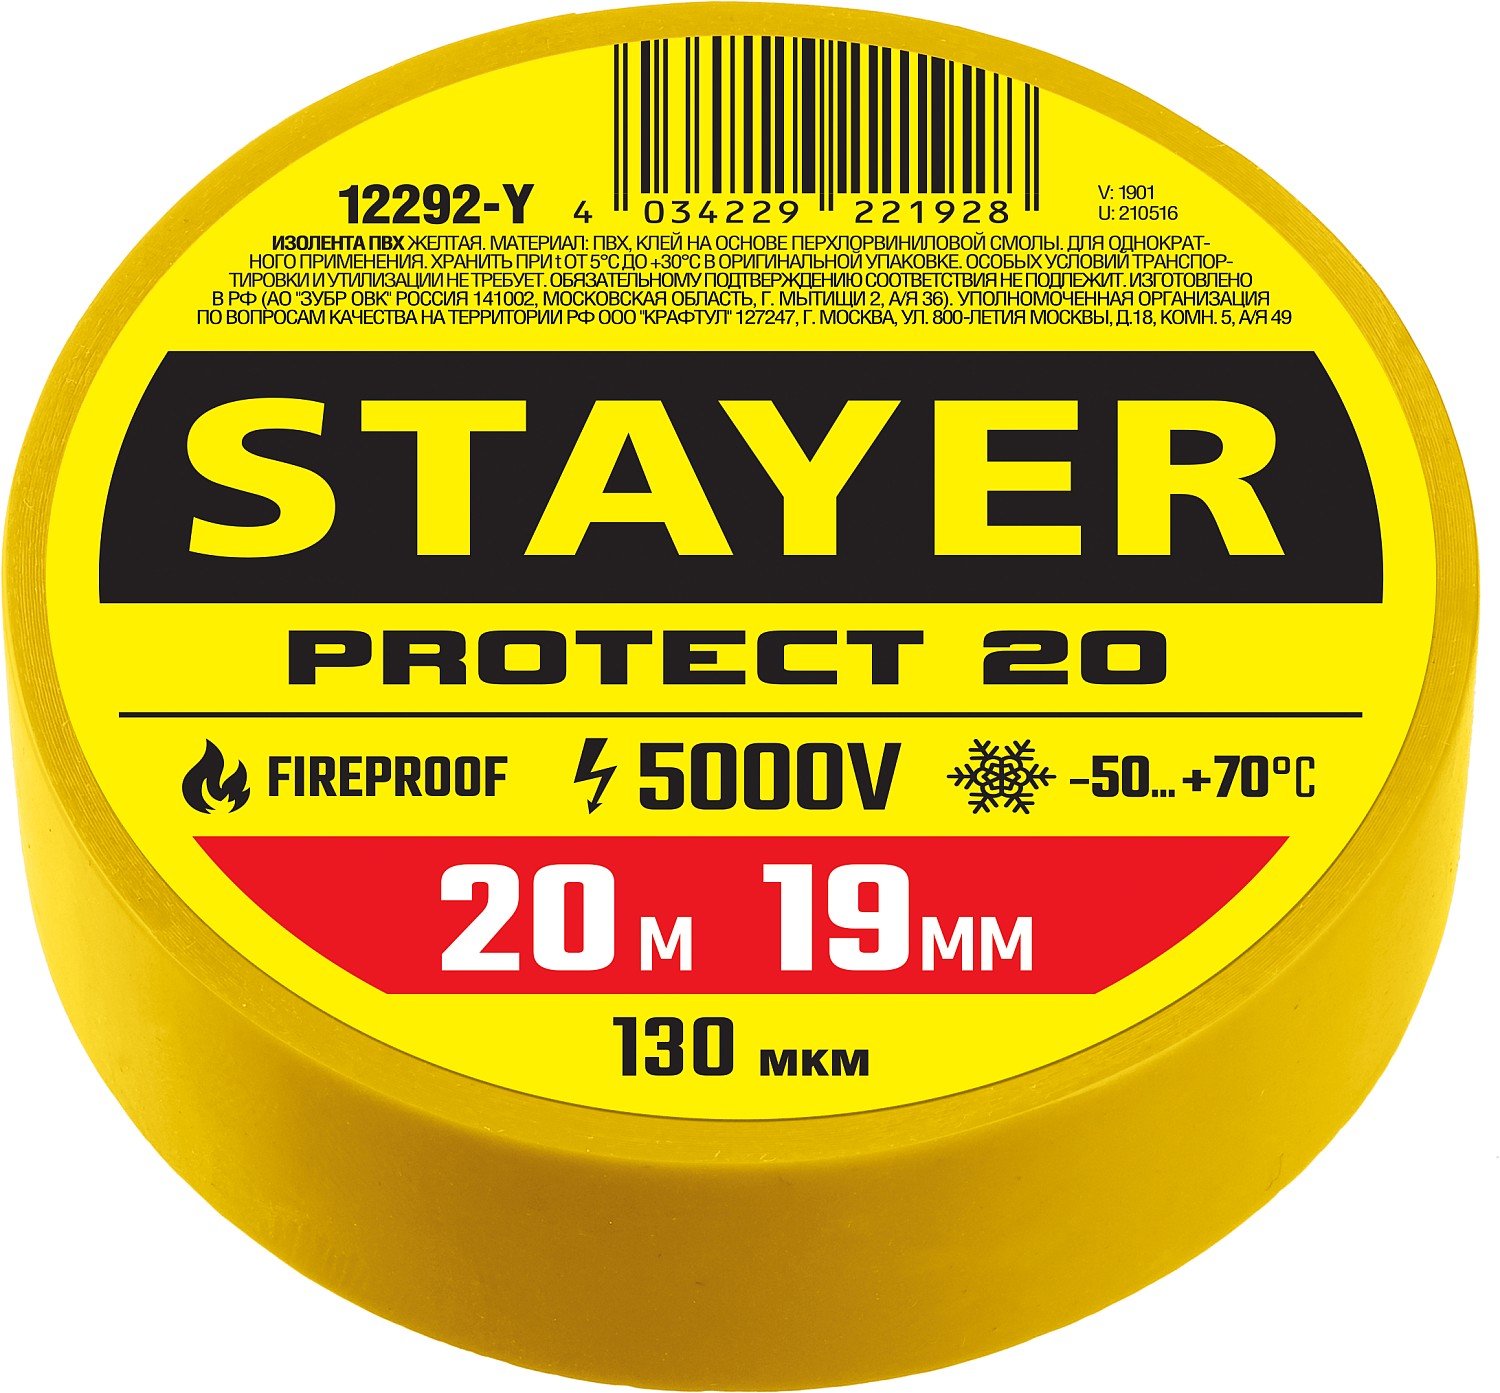    STAYER Protect-20 19   20   (12292-Y)